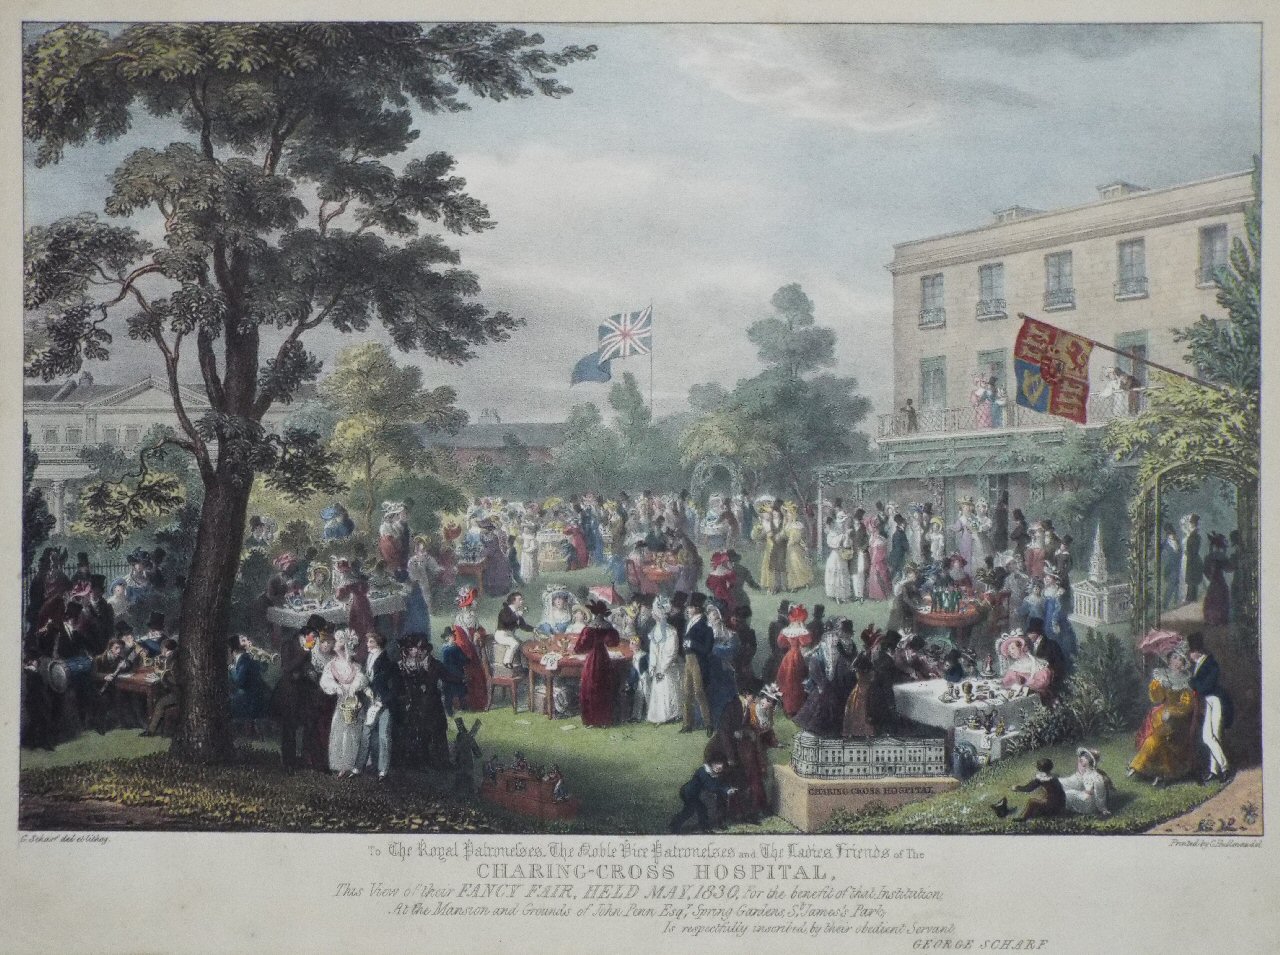 Lithograph - To the Royal Patronesses, The Noble Vice-Patronesses and the Ladies, Friends of The Charing-Cross Hospital, This View of their Fancy Fair, Held May 1830, For the benefit of that institution, At the Mansion and Grounds of John Penn Esqr, Spring Gardens, St. James's Park, Is respectfully inscribed by their obedient Servant, George Scharf. - Scharf